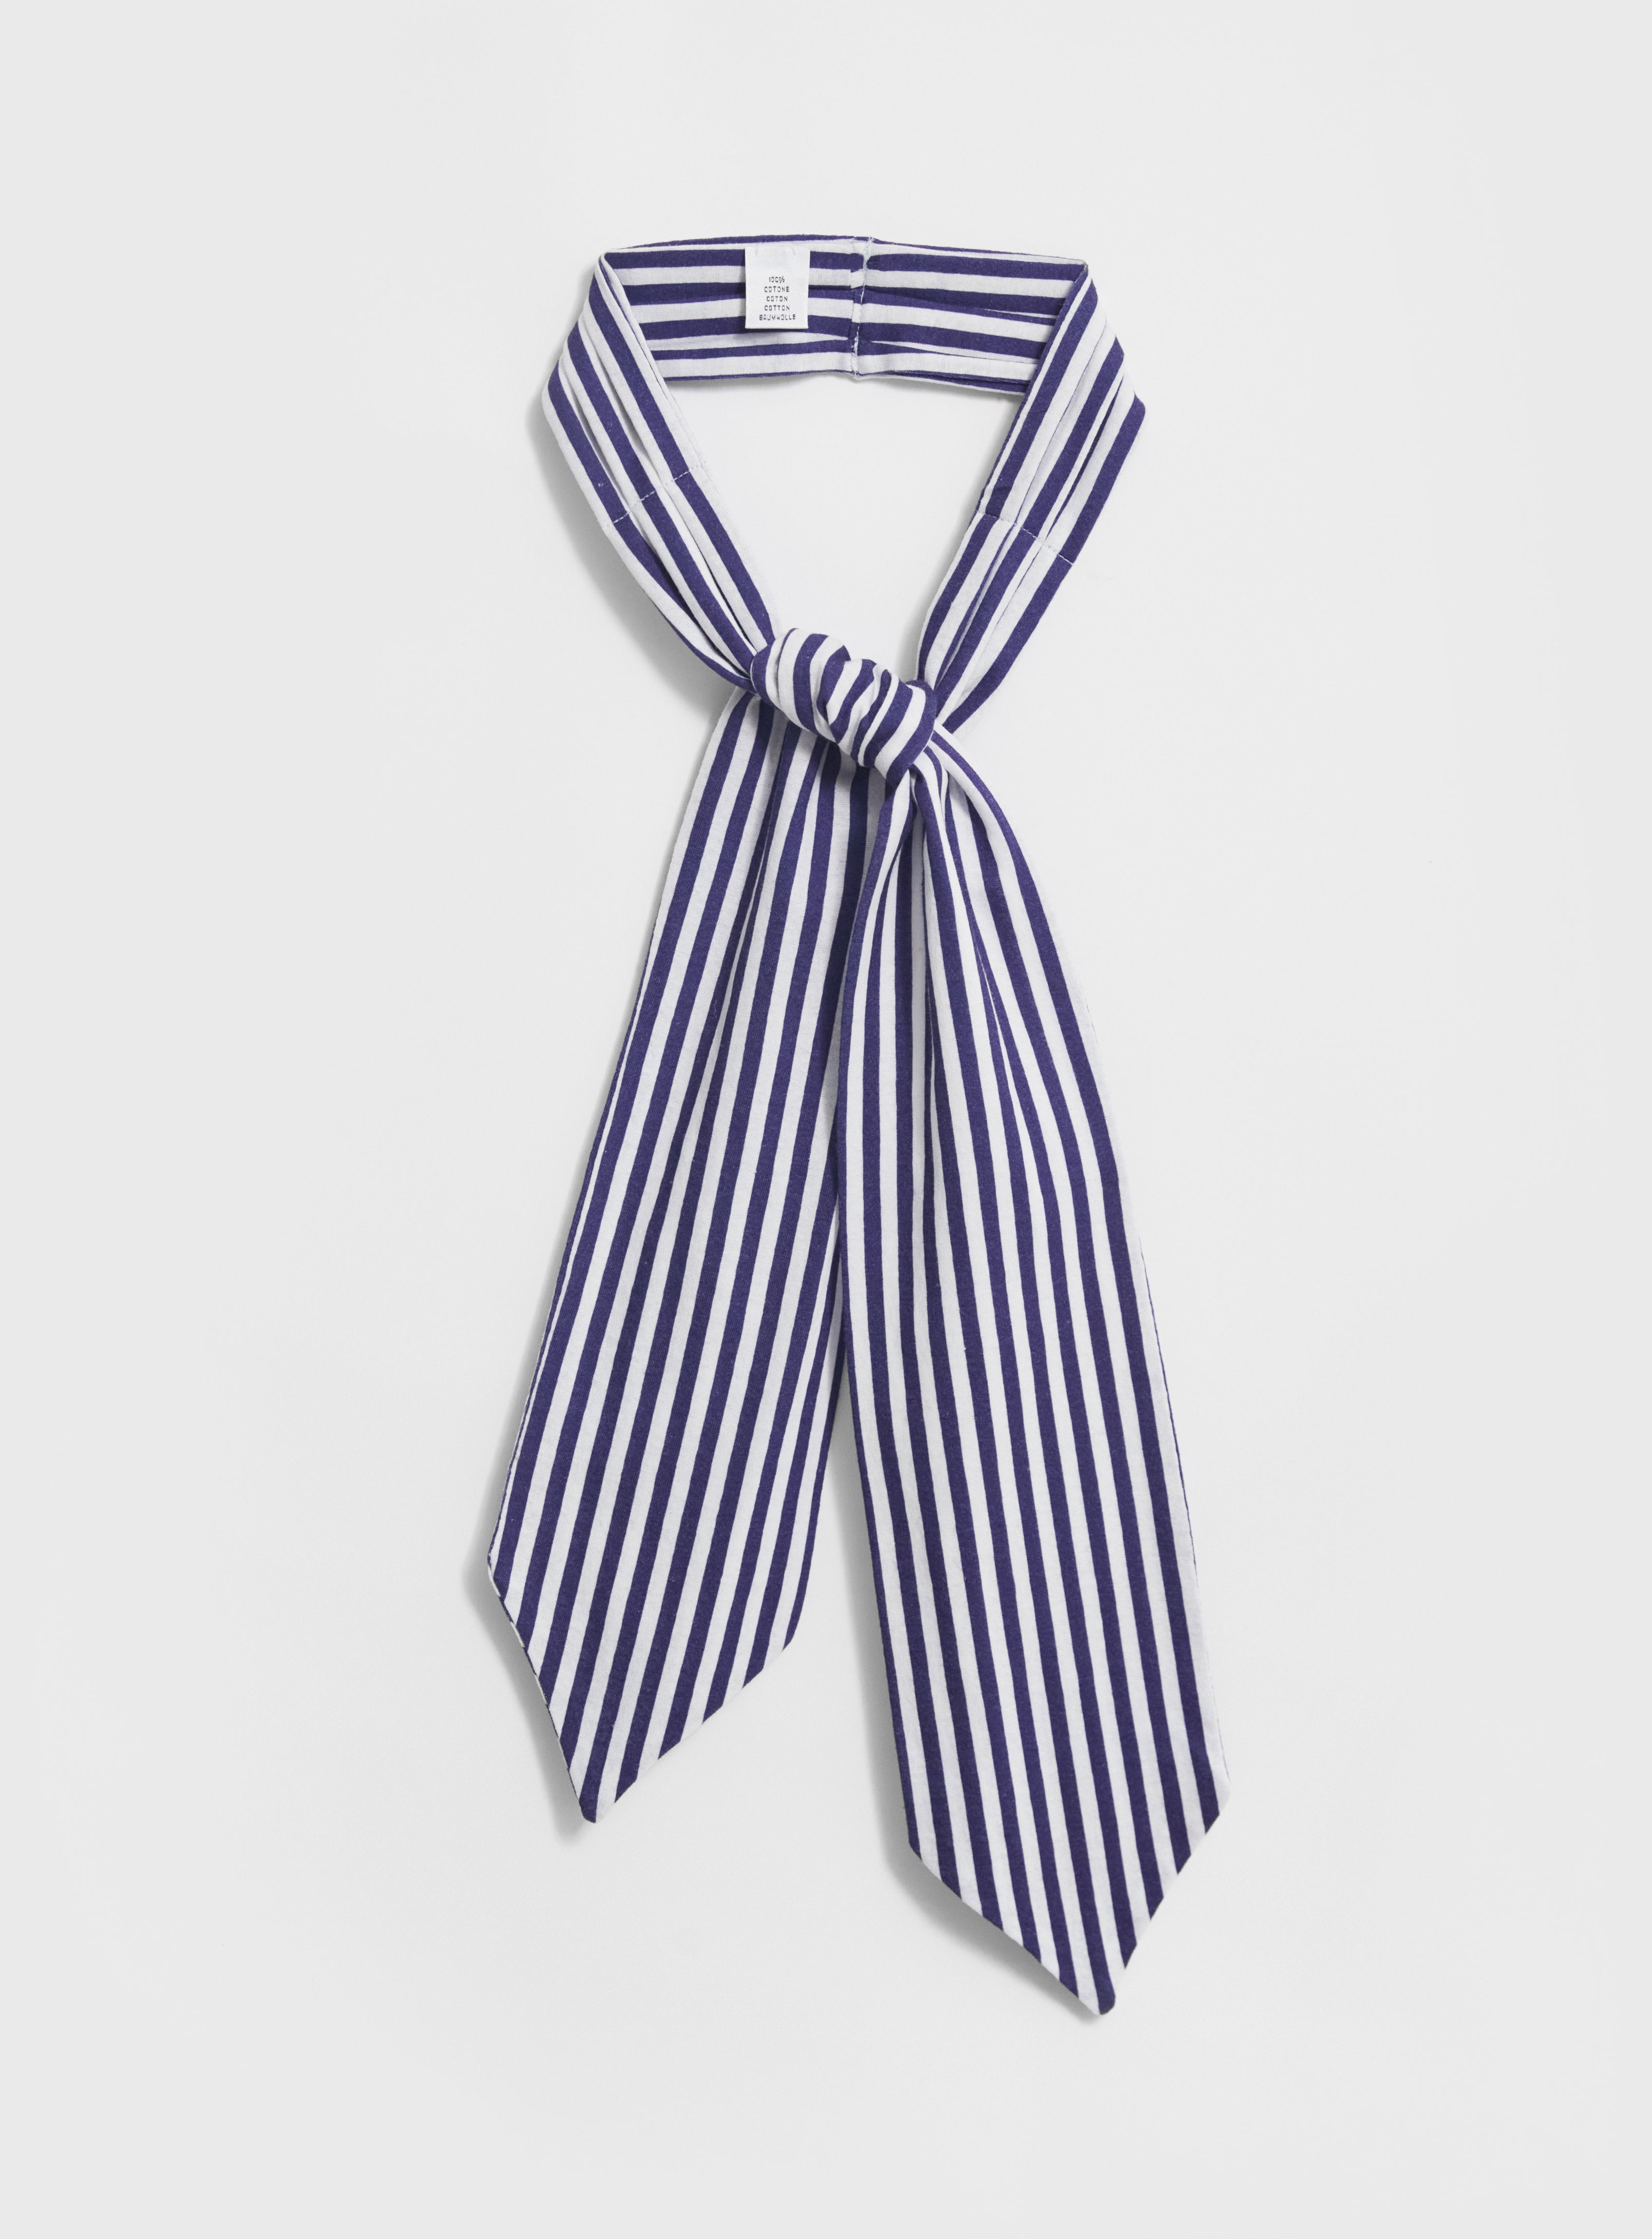 The Navy Old School Stripe Recycled Neck Scarf